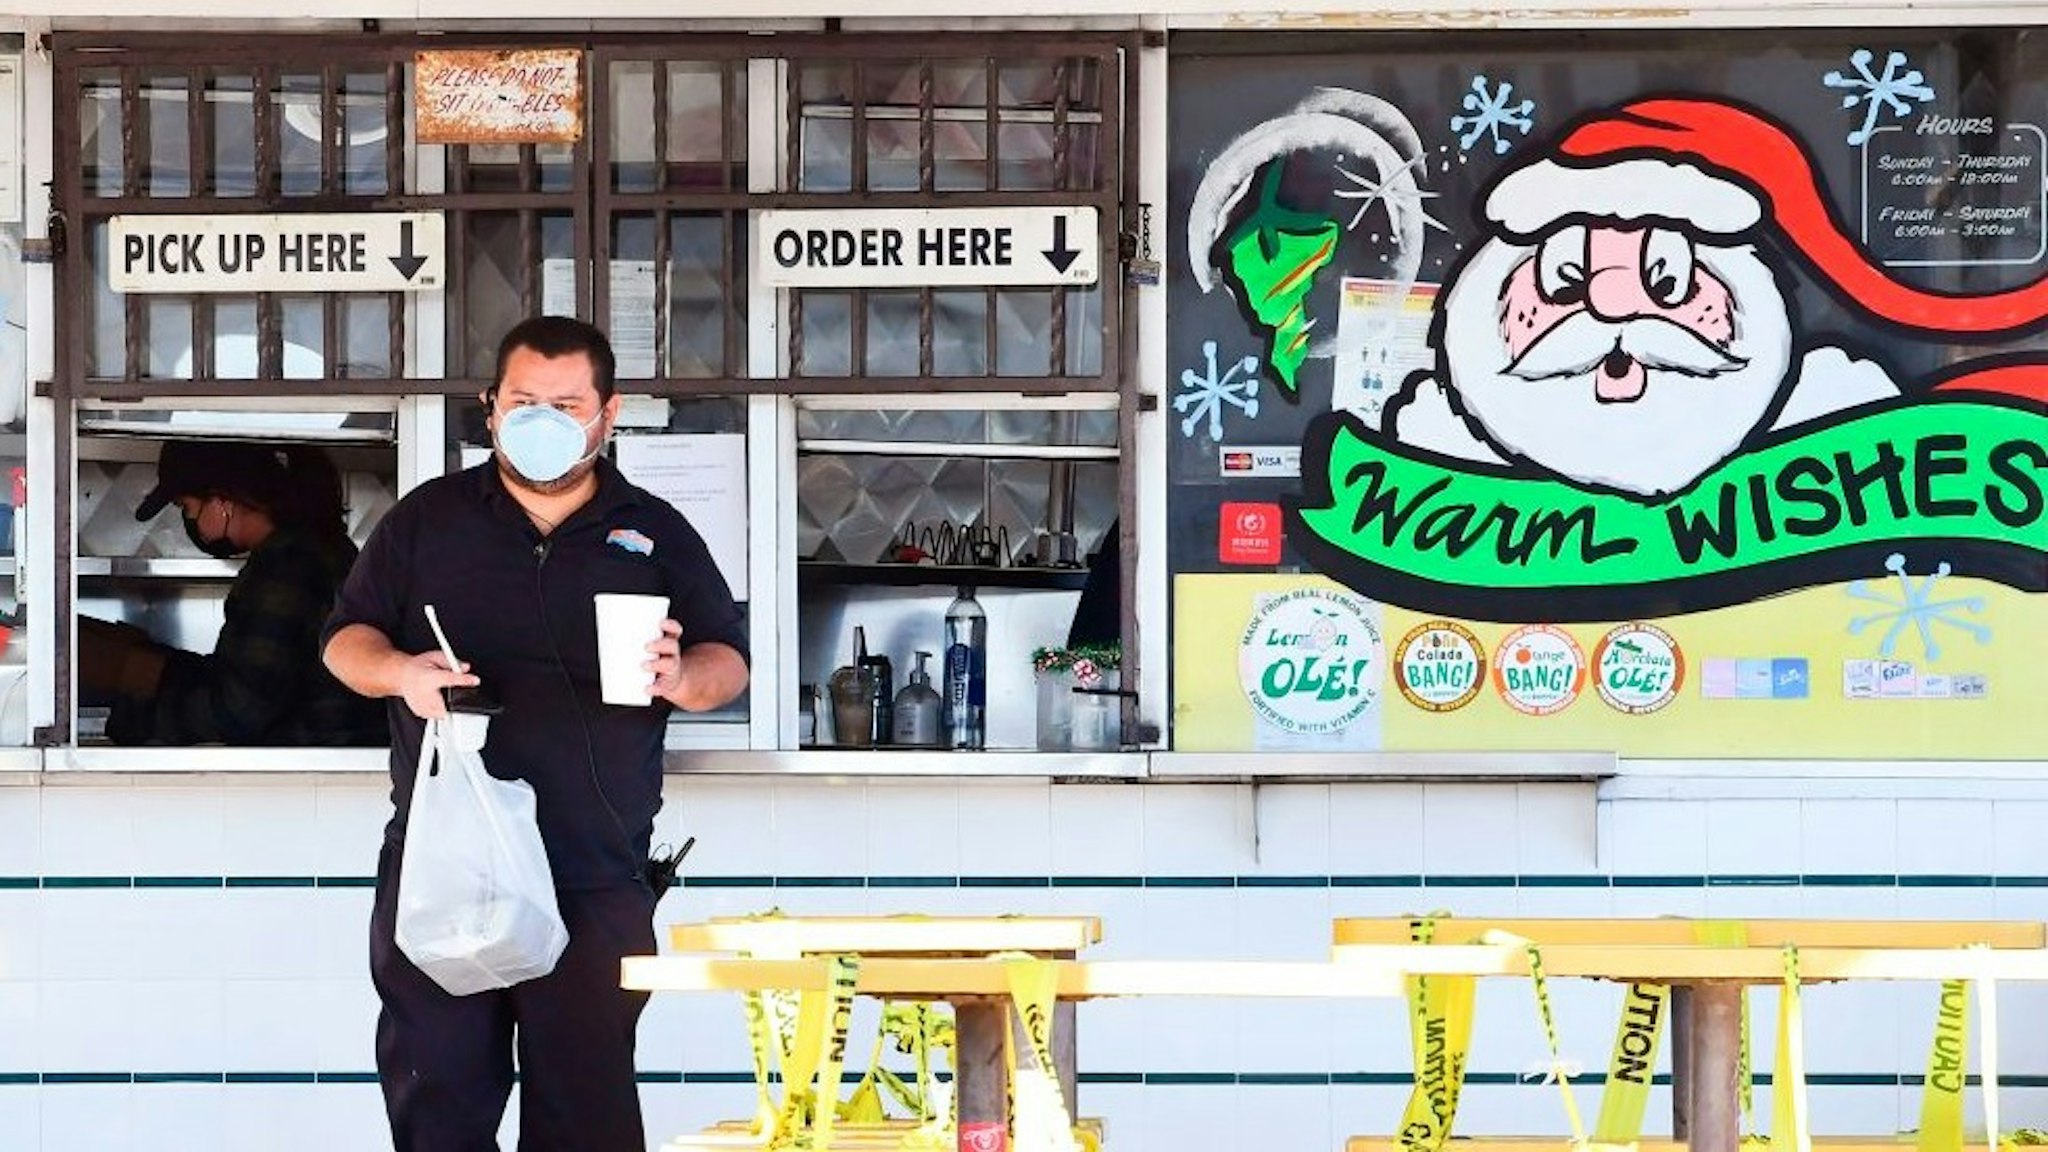 A customer receives his takeout order from a restaurant in Los Angeles, California on December 1, 2020. - A county-wide coronavirus regulations went into effect again on November 30 for three weeks amid ever increasing numbers of positive Covid-19 cases and fears of overwhelmed hospitals. Aid for restaurants will begin on December 3, with the start of the Keep Los Angeles County Dining Grant Program , allowing eligible restaurants which have lost business due to countywide coronavirus health regulations to apply for and receive up to $30,000 in aid. (Photo by Frederic J. BROWN / AFP) (Photo by FREDERIC J. BROWN/AFP via Getty Images)